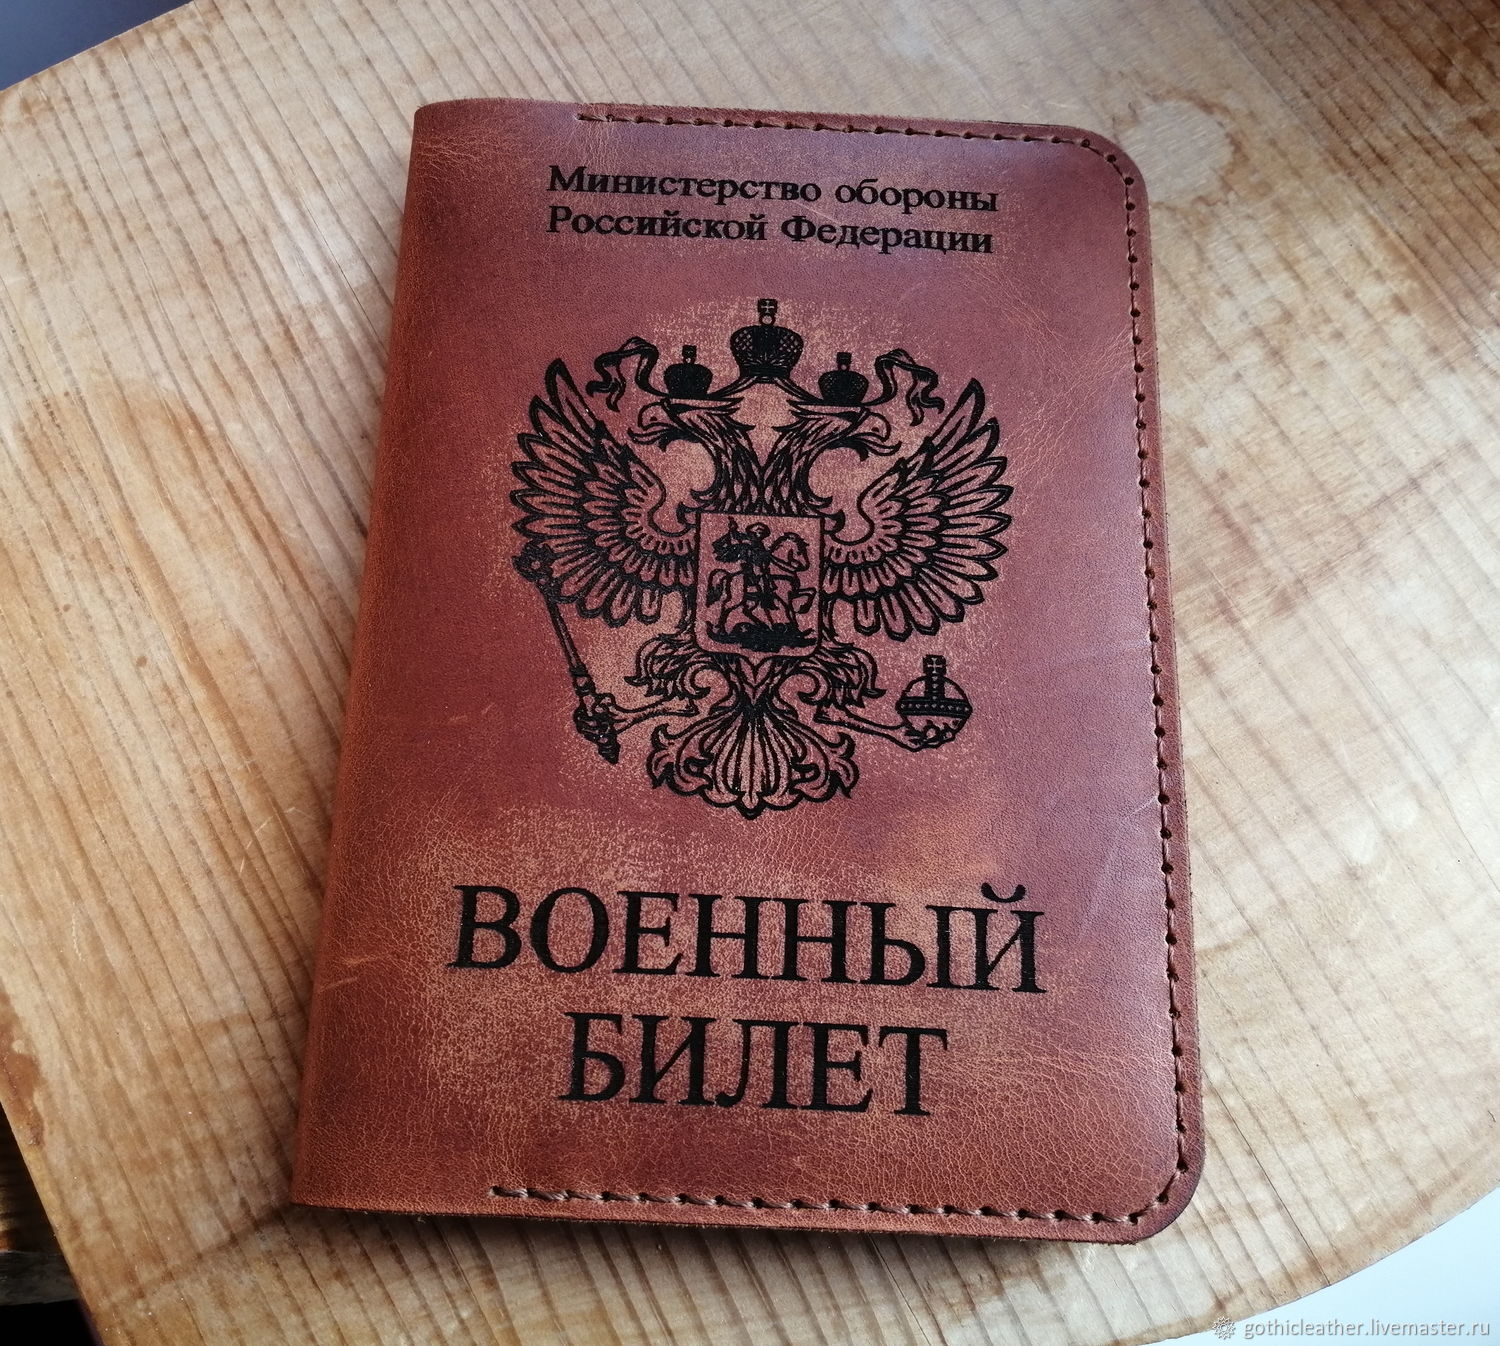 Cover for a military ticket made of genuine leather, Cover, Yoshkar-Ola,  Фото №1